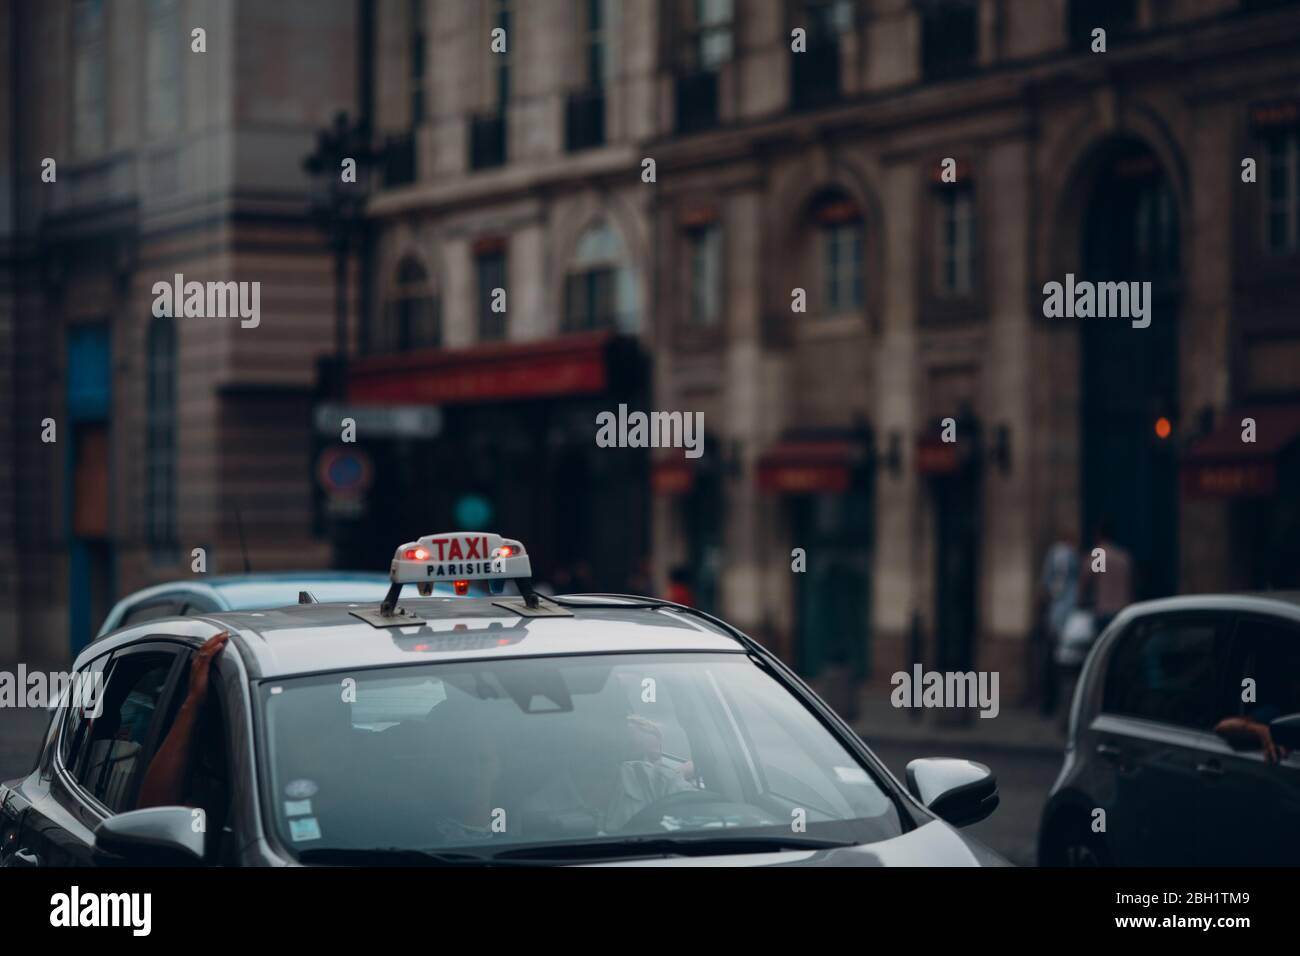 Paris taxi. Luminous sign on the roof of the car Stock Photo